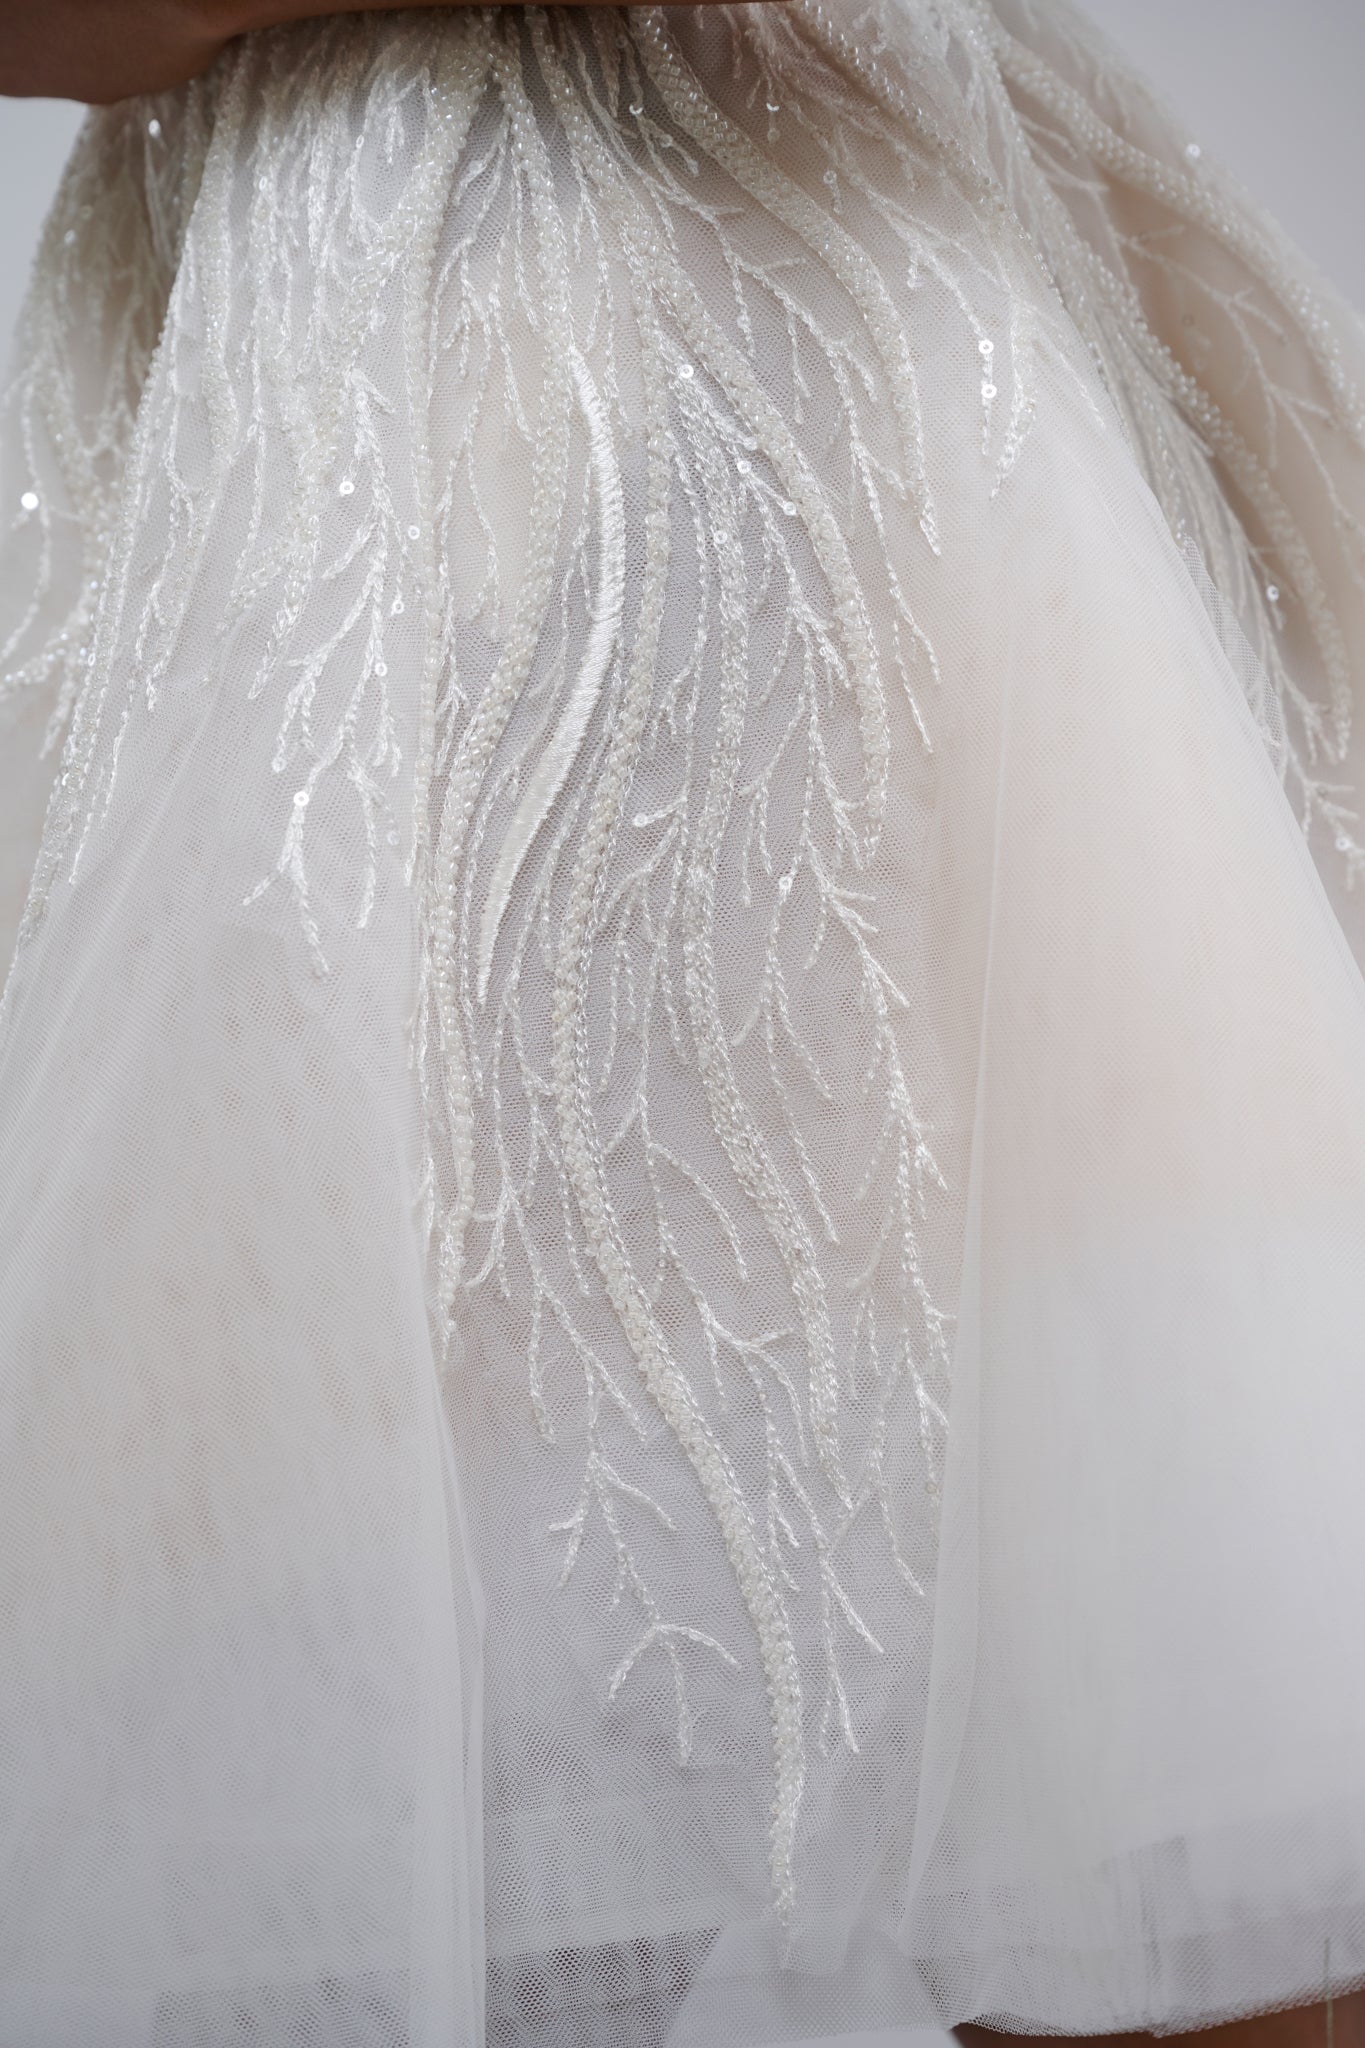 flowing lace overlay on a tulle skirt